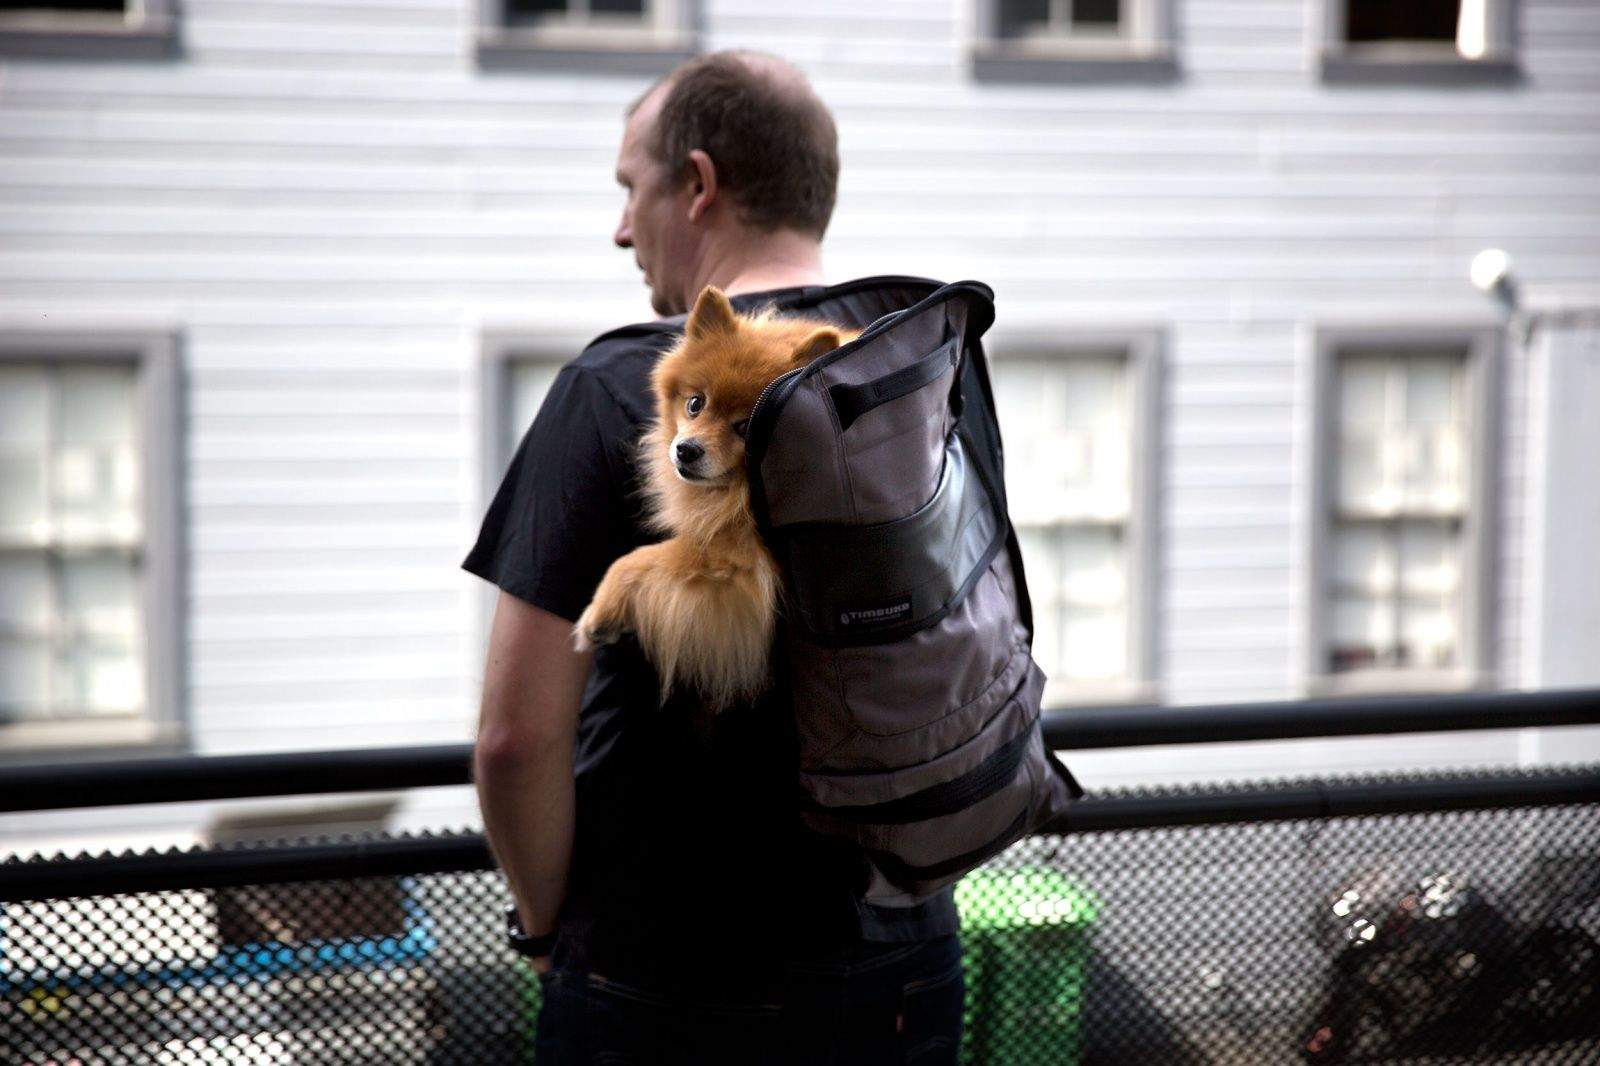 Each and every month, Lust List rounds up the products that shook us all night long. This time we've got unique backpacks, iPhone-saving cases, cool music gear, hot chile booze and much more.

Timbuk2 Muttmover dog backpack

My mother's dog is a little fluffy menace. A Pomeranian, he looks like dog treats wouldn't melt in his mouth, but he's a terror. He goes completely bananas when other dogs are around, and gets bitey if you try to move him off the couch. Last time I tried to stop him from eating the cat's food, I had to go get a tetanus shot. The neighbors call him 